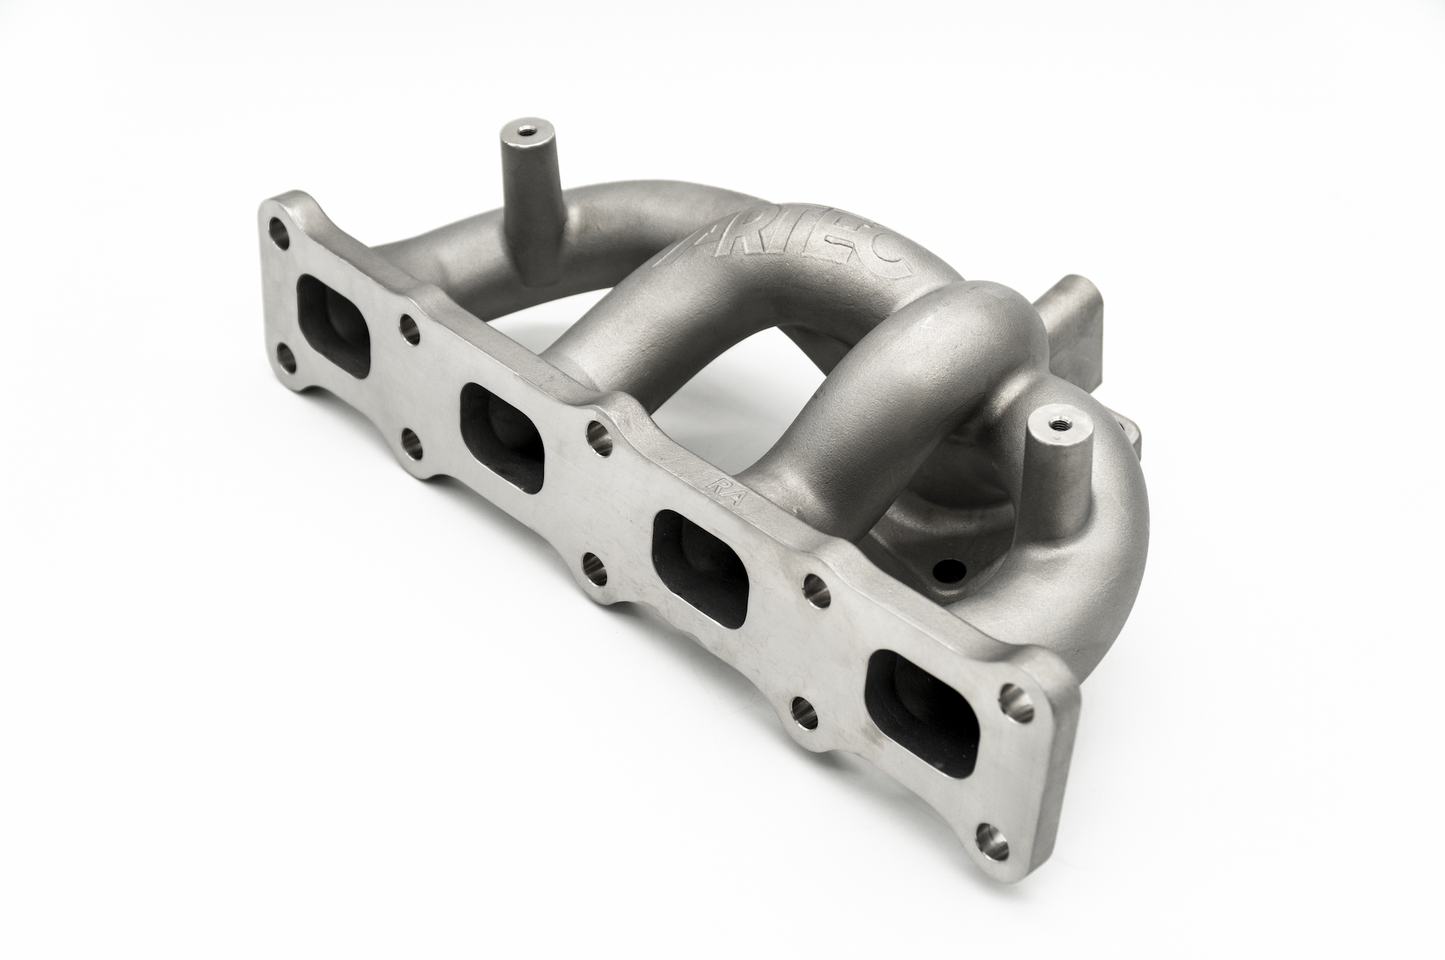 ARTEC - Lancer Ralliart 09-15 4B11T Cast Stainless Steel Factory Replacement Turbo Manifold